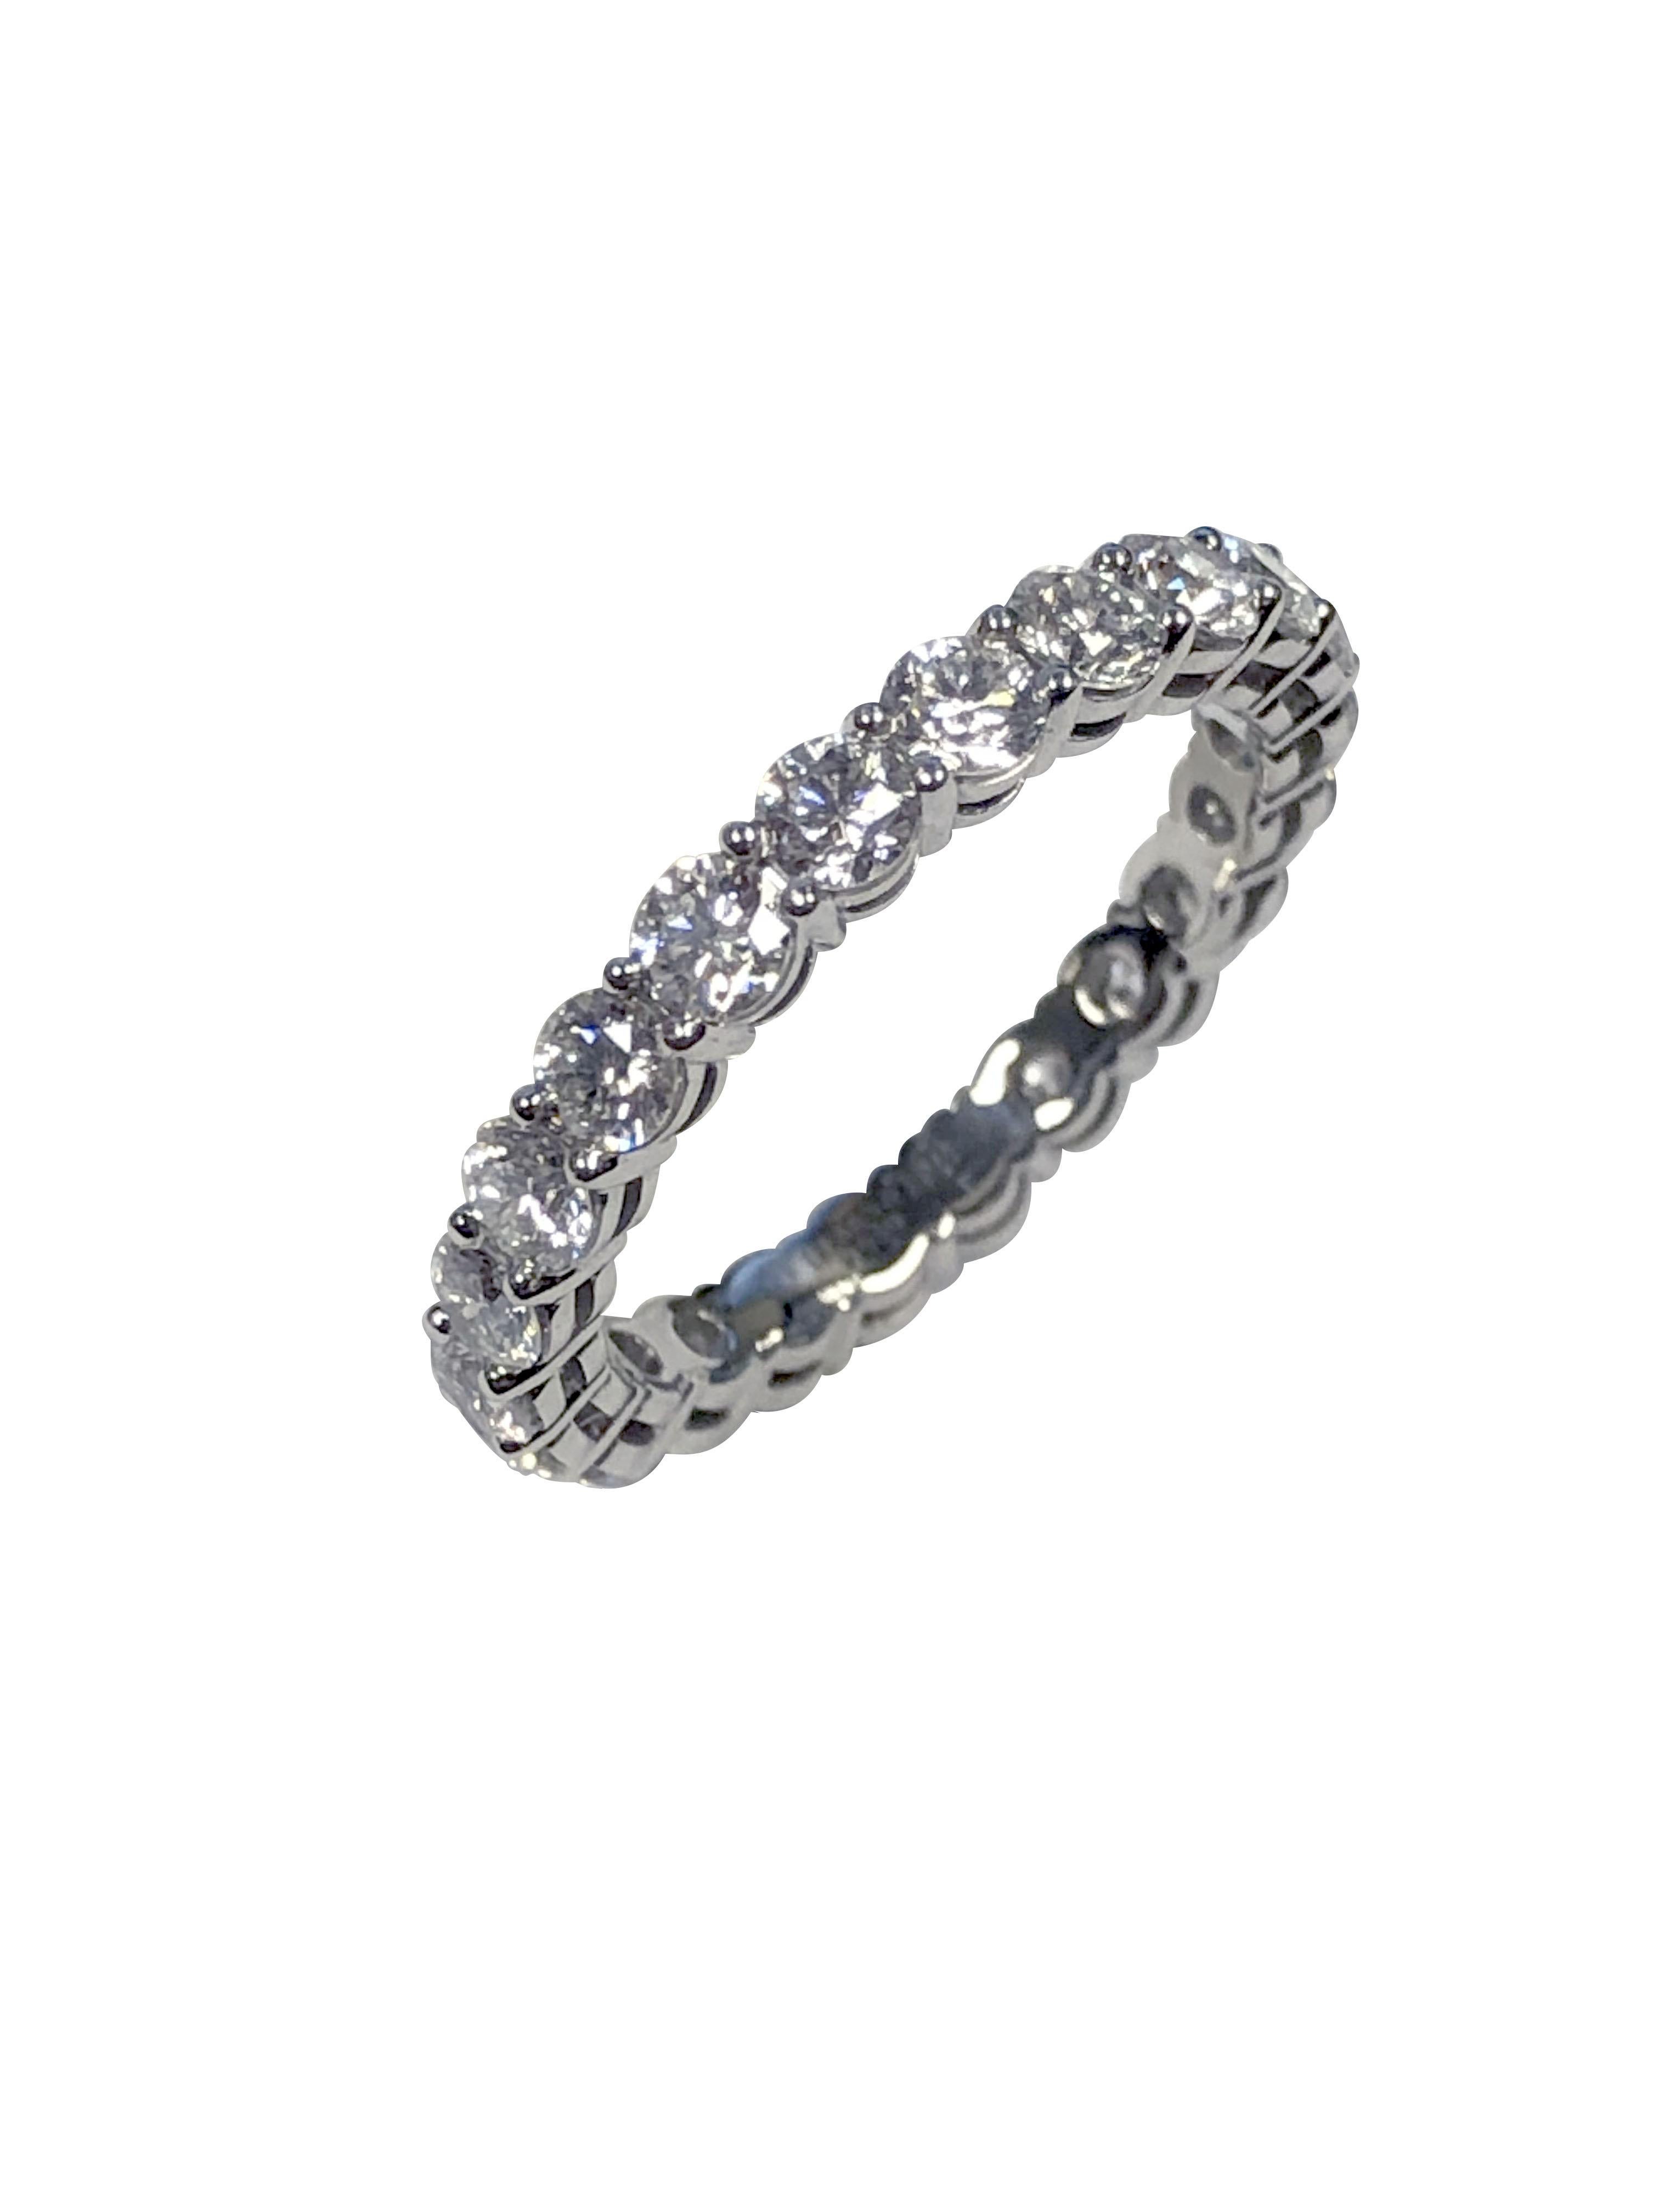 Round Cut Tiffany & Company Forever collection Platinum and Diamond Eternity Band Ring For Sale